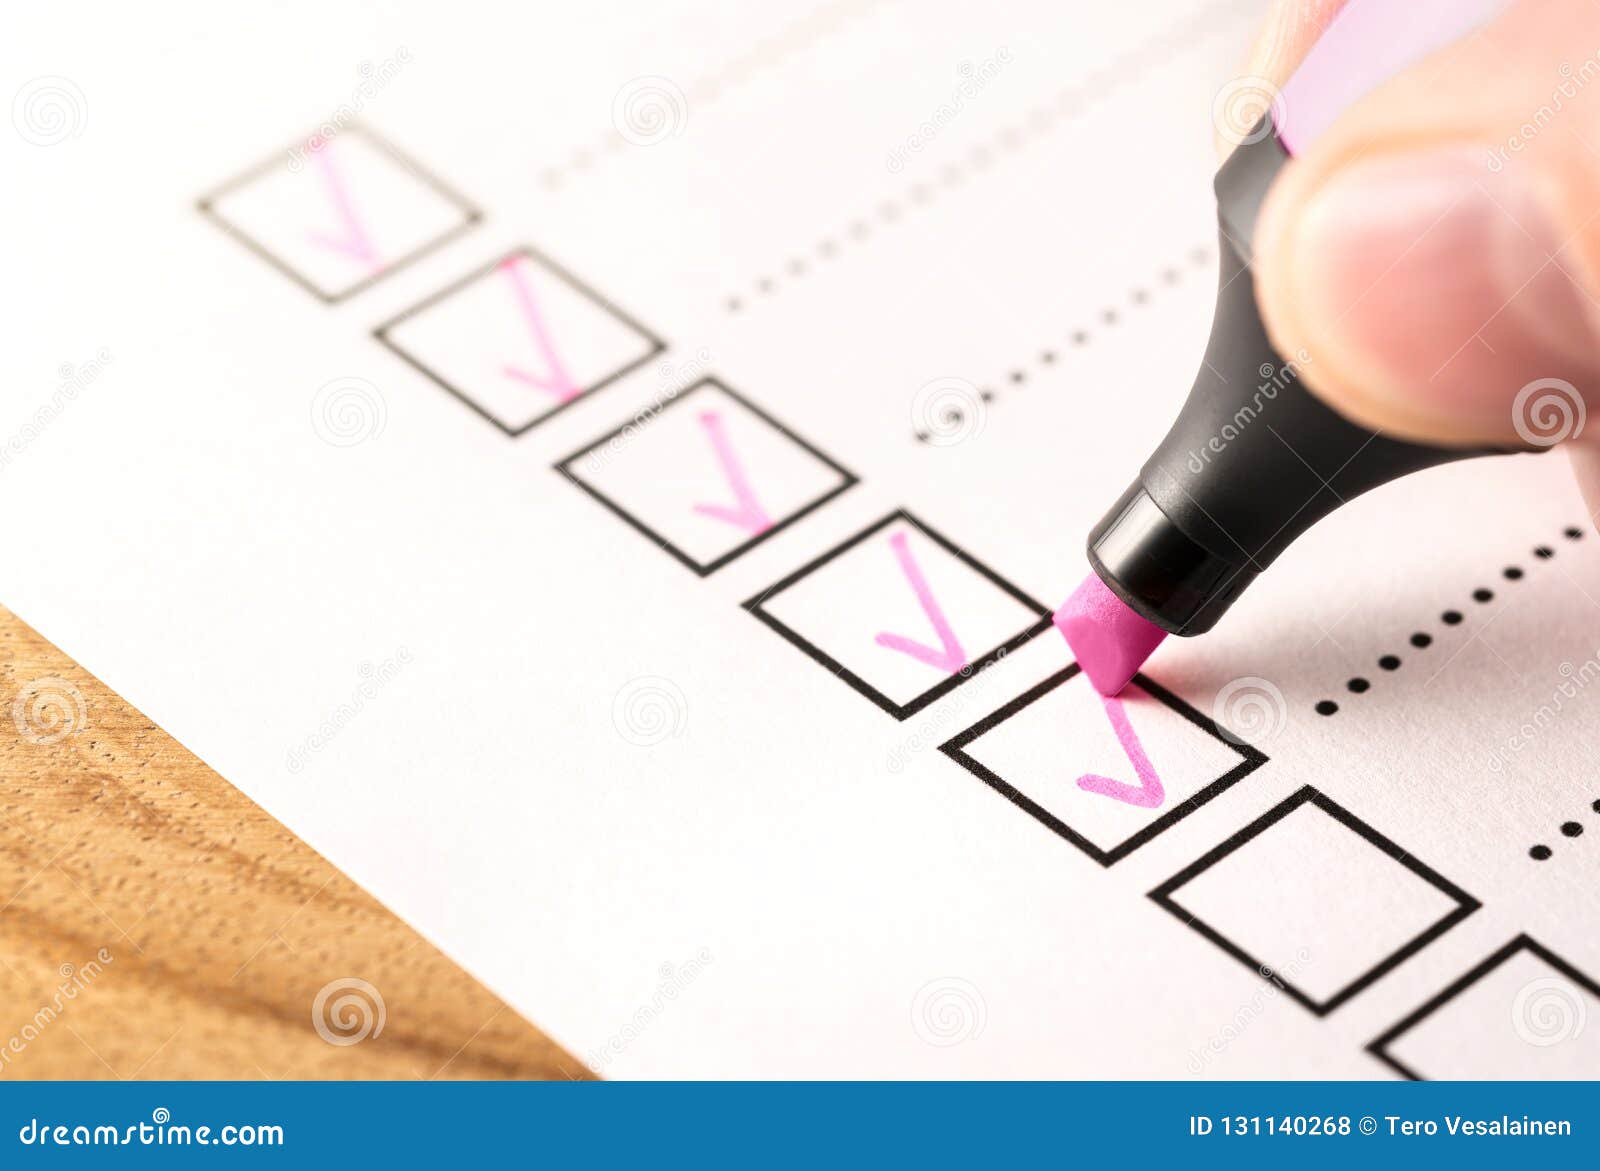 checklist, keeping score of obligations or completed tasks in project concept.